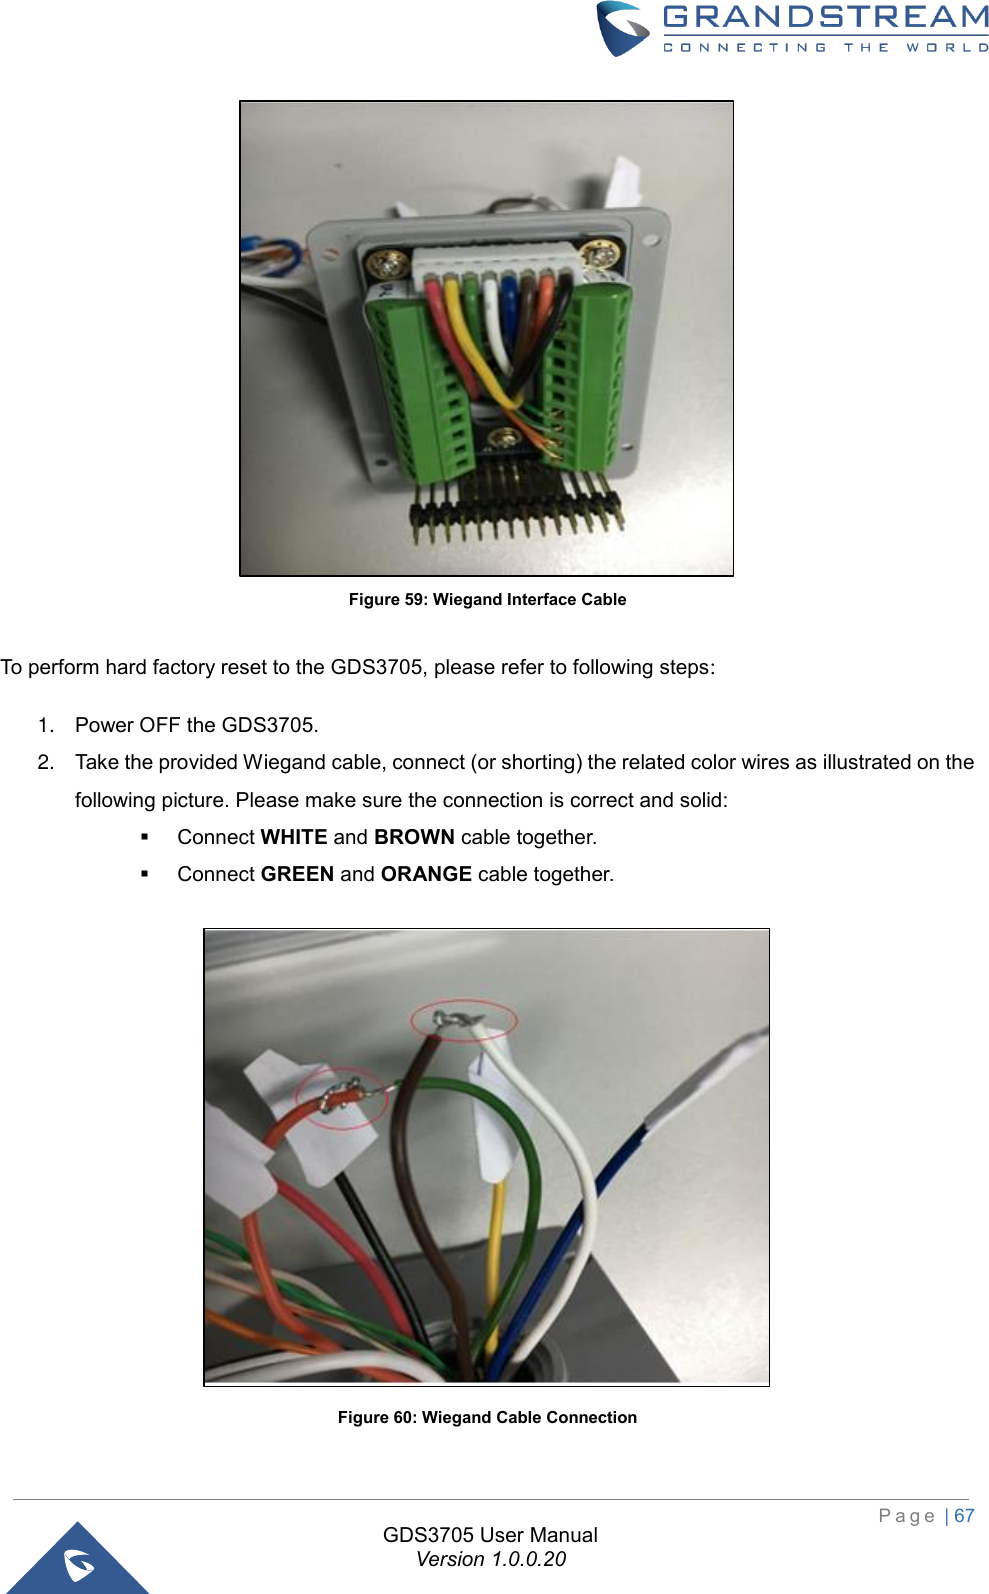                                                                         P a g e  | 67  GDS3705 User Manual Version 1.0.0.20  Figure 59: Wiegand Interface Cable  To perform hard factory reset to the GDS3705, please refer to following steps: 1. Power OFF the GDS3705. 2. Take the provided Wiegand cable, connect (or shorting) the related color wires as illustrated on the following picture. Please make sure the connection is correct and solid: ▪ Connect WHITE and BROWN cable together. ▪ Connect GREEN and ORANGE cable together.  Figure 60: Wiegand Cable Connection  